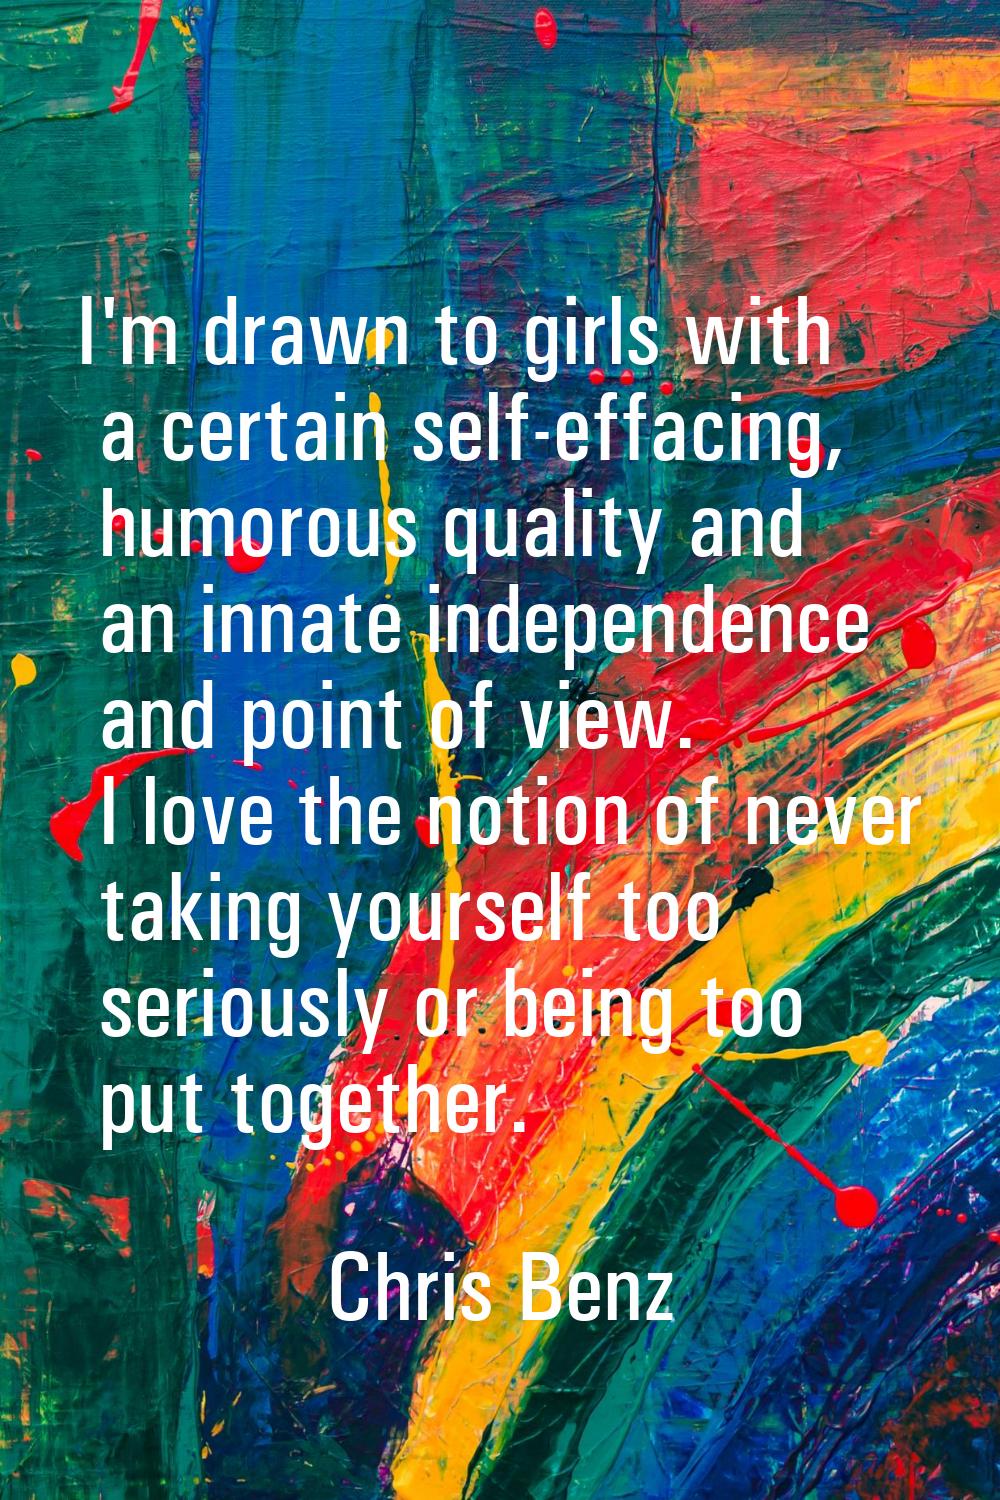 I'm drawn to girls with a certain self-effacing, humorous quality and an innate independence and po